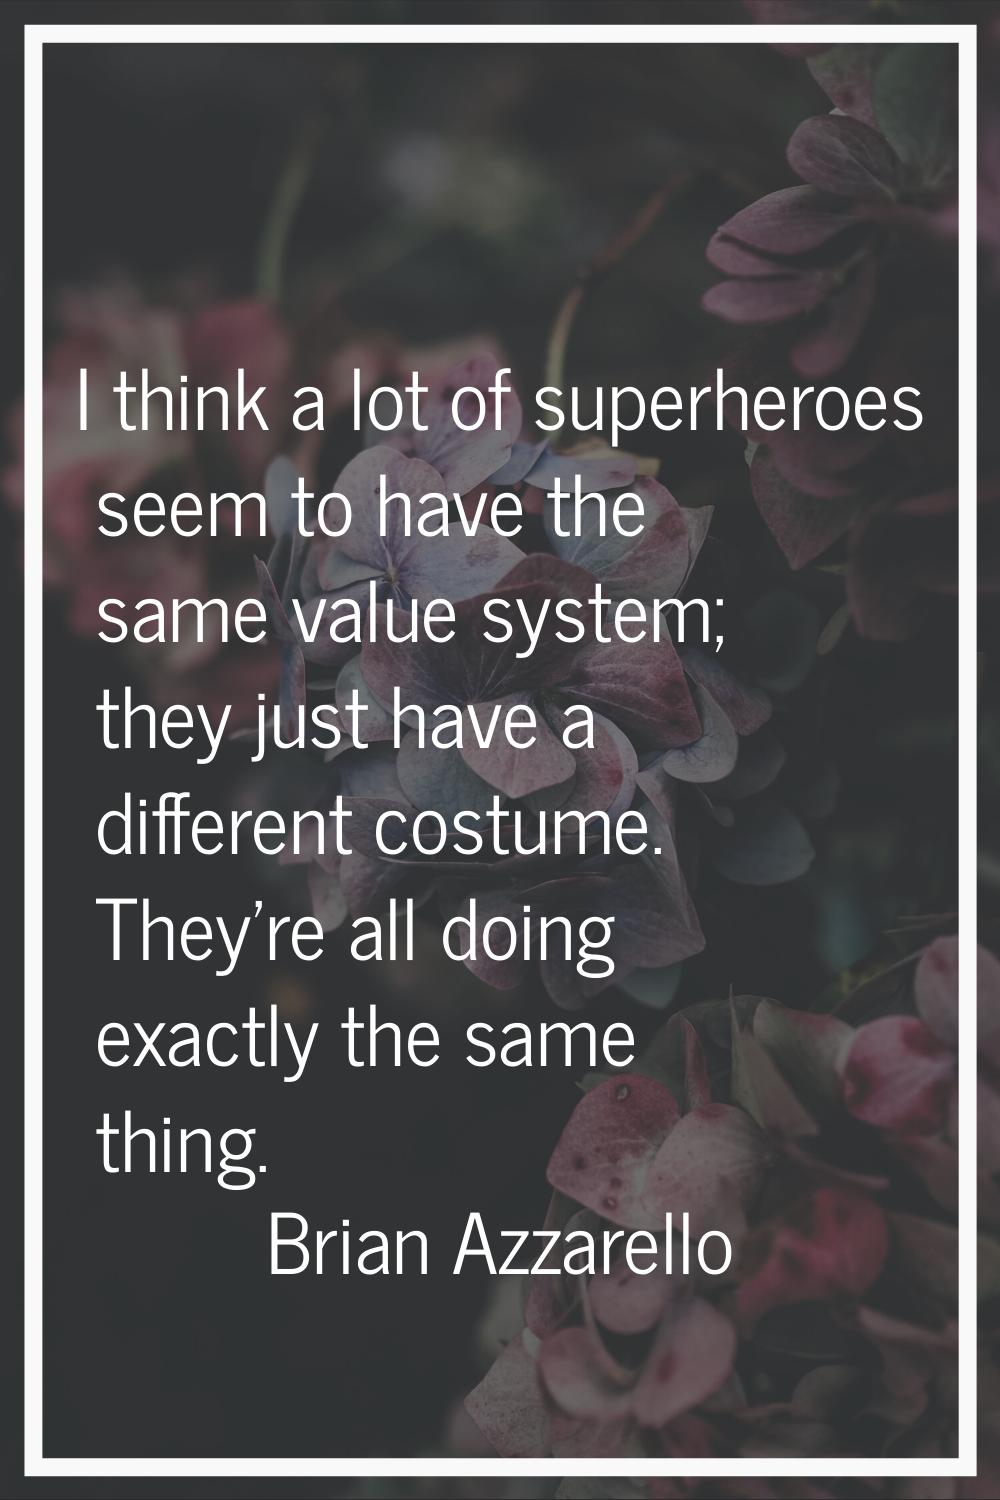 I think a lot of superheroes seem to have the same value system; they just have a different costume